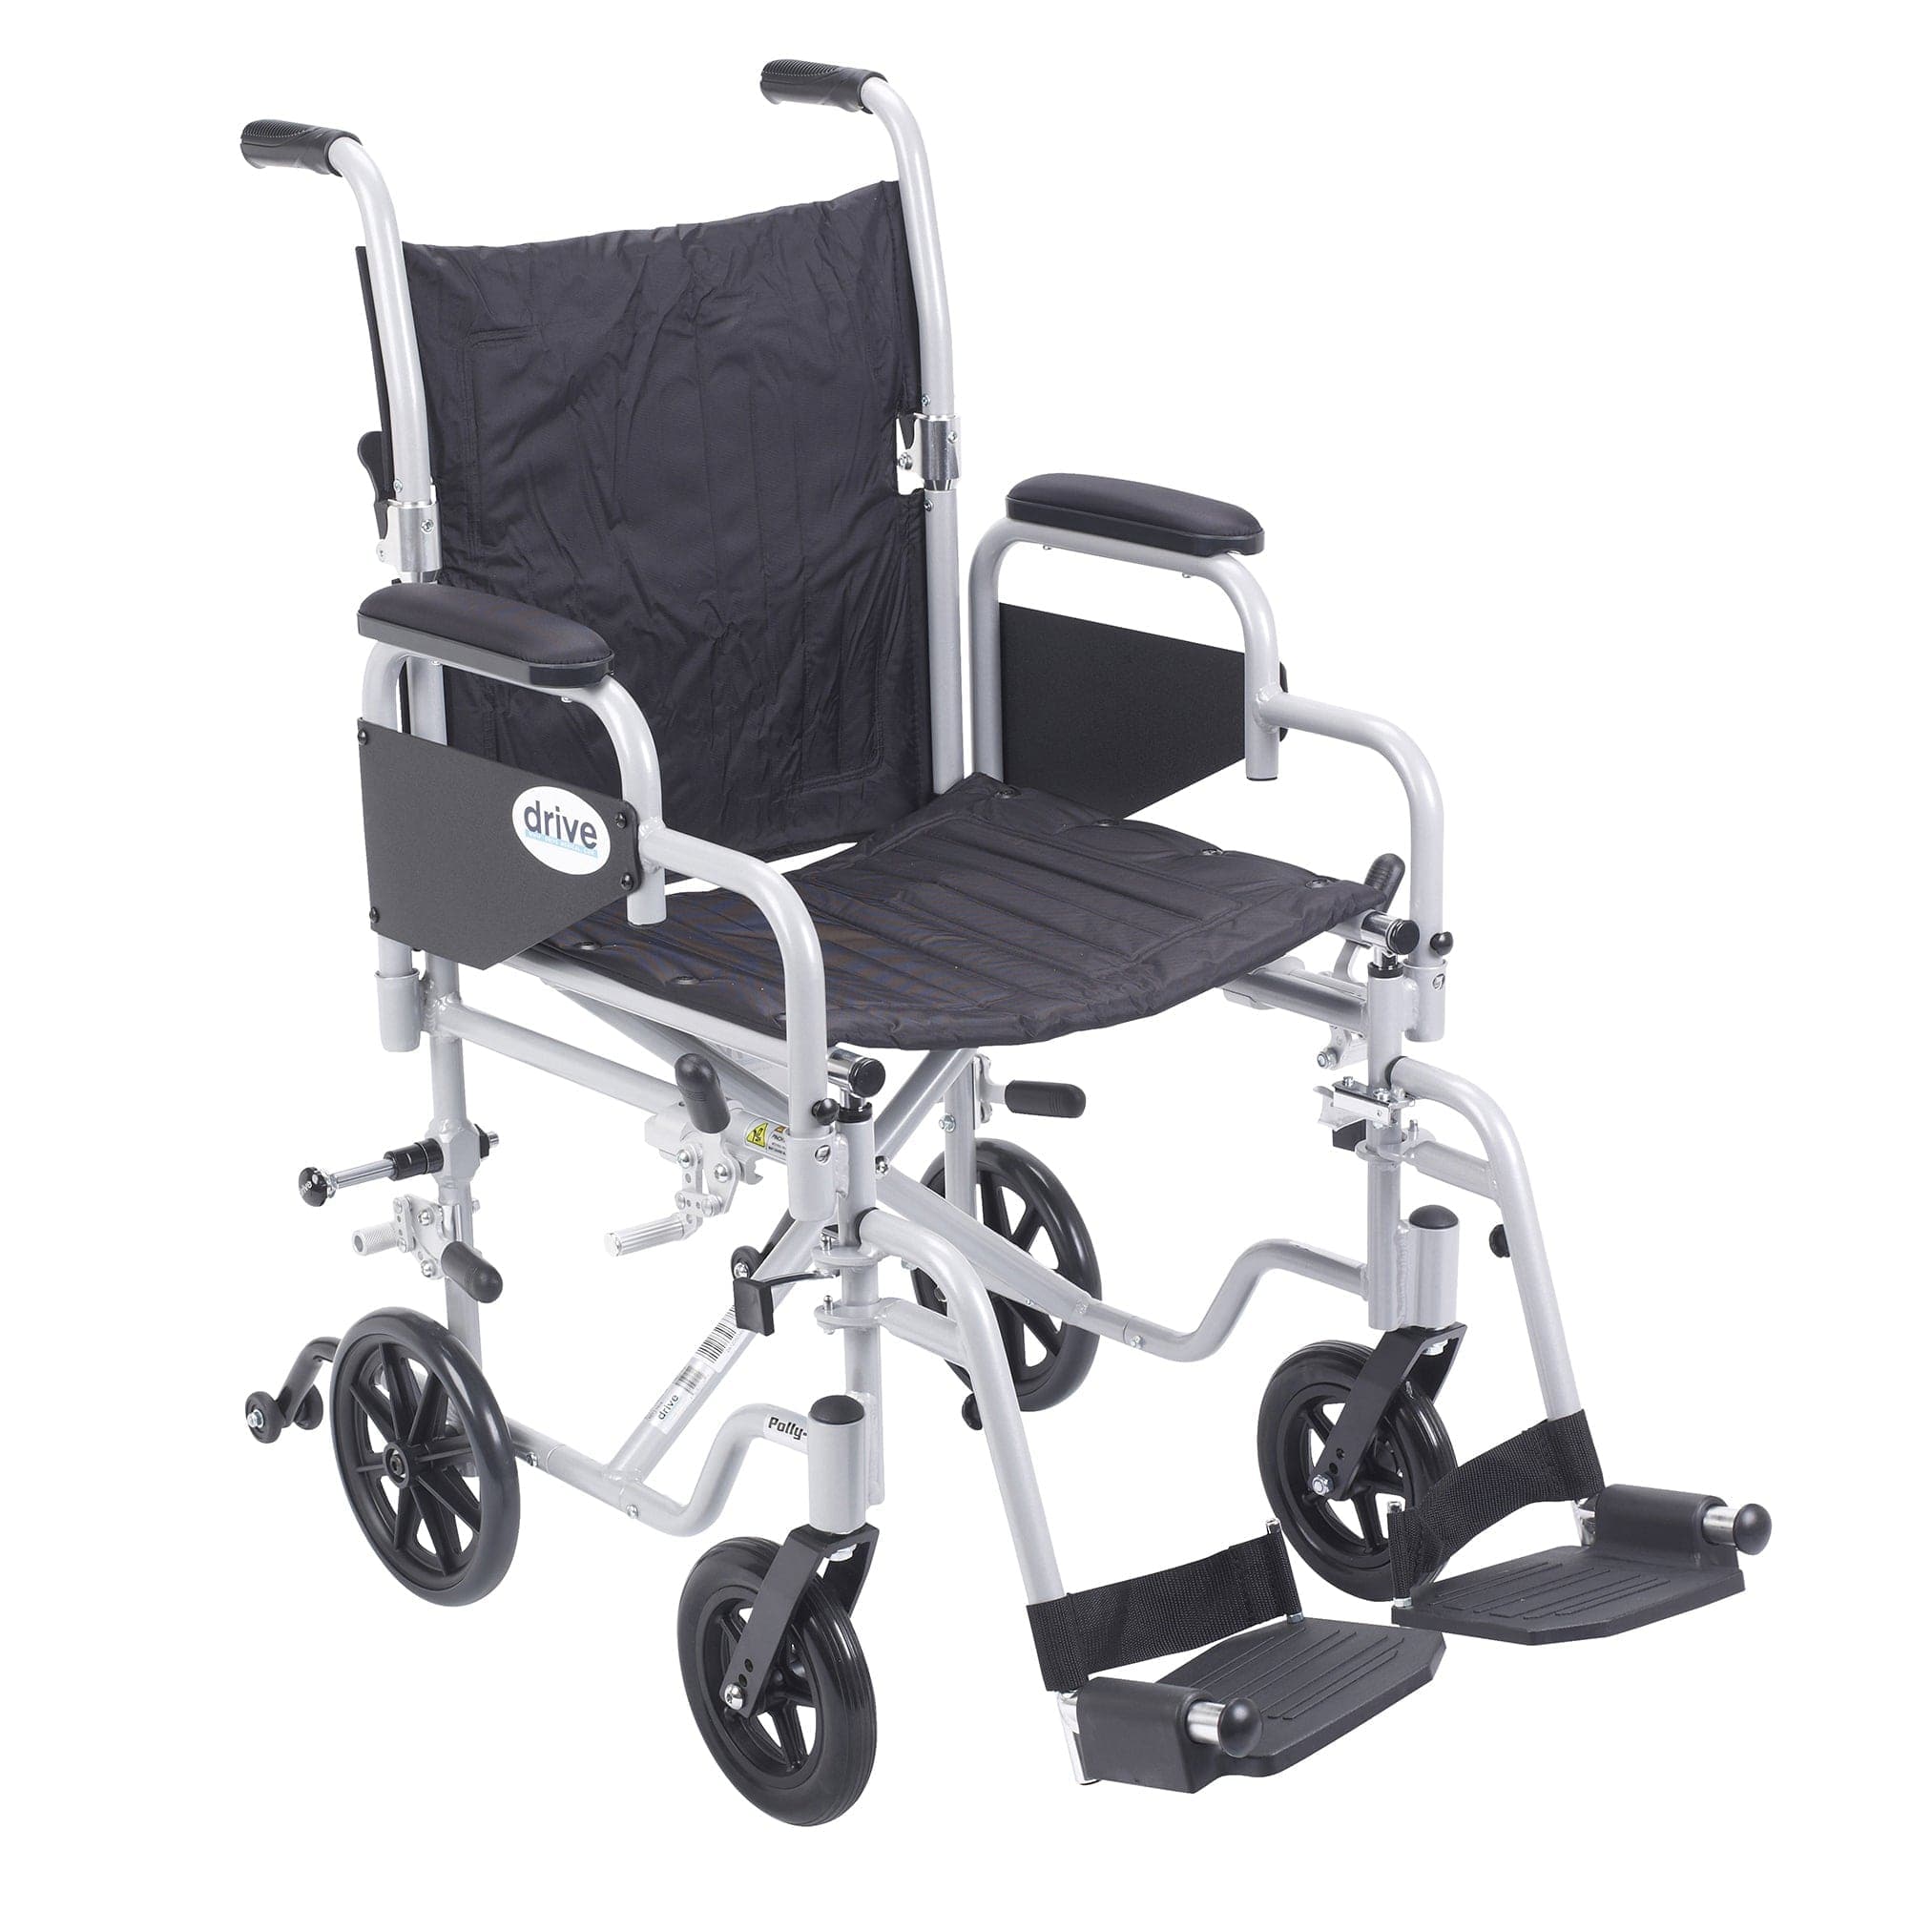 Drive Medical Wheelchairs 18" Seat Size Drive Medical Poly Fly Light Weight Transport Chair Wheelchair with Swing away Footrest